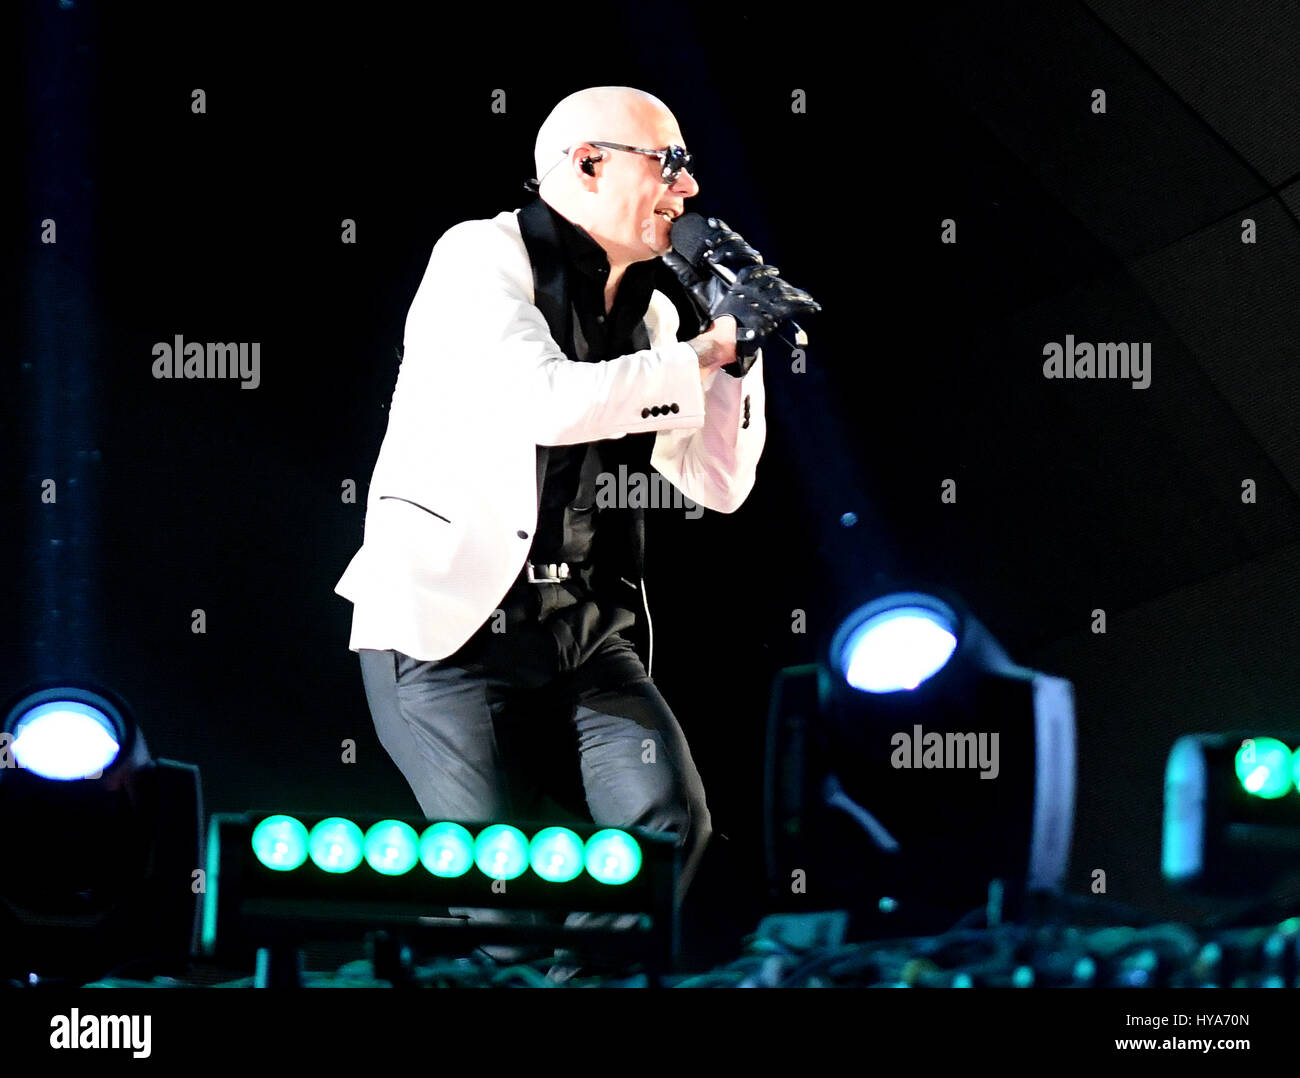 Orlando, FL, USA. 2nd Apr, 2017. Pitbull performs at WWE's WrestleMania 33 at the Camping World Stadium in Orlando, Florida on April 2, 2017. Credit: George Napolitano/Media Punch/Alamy Live News Stock Photo